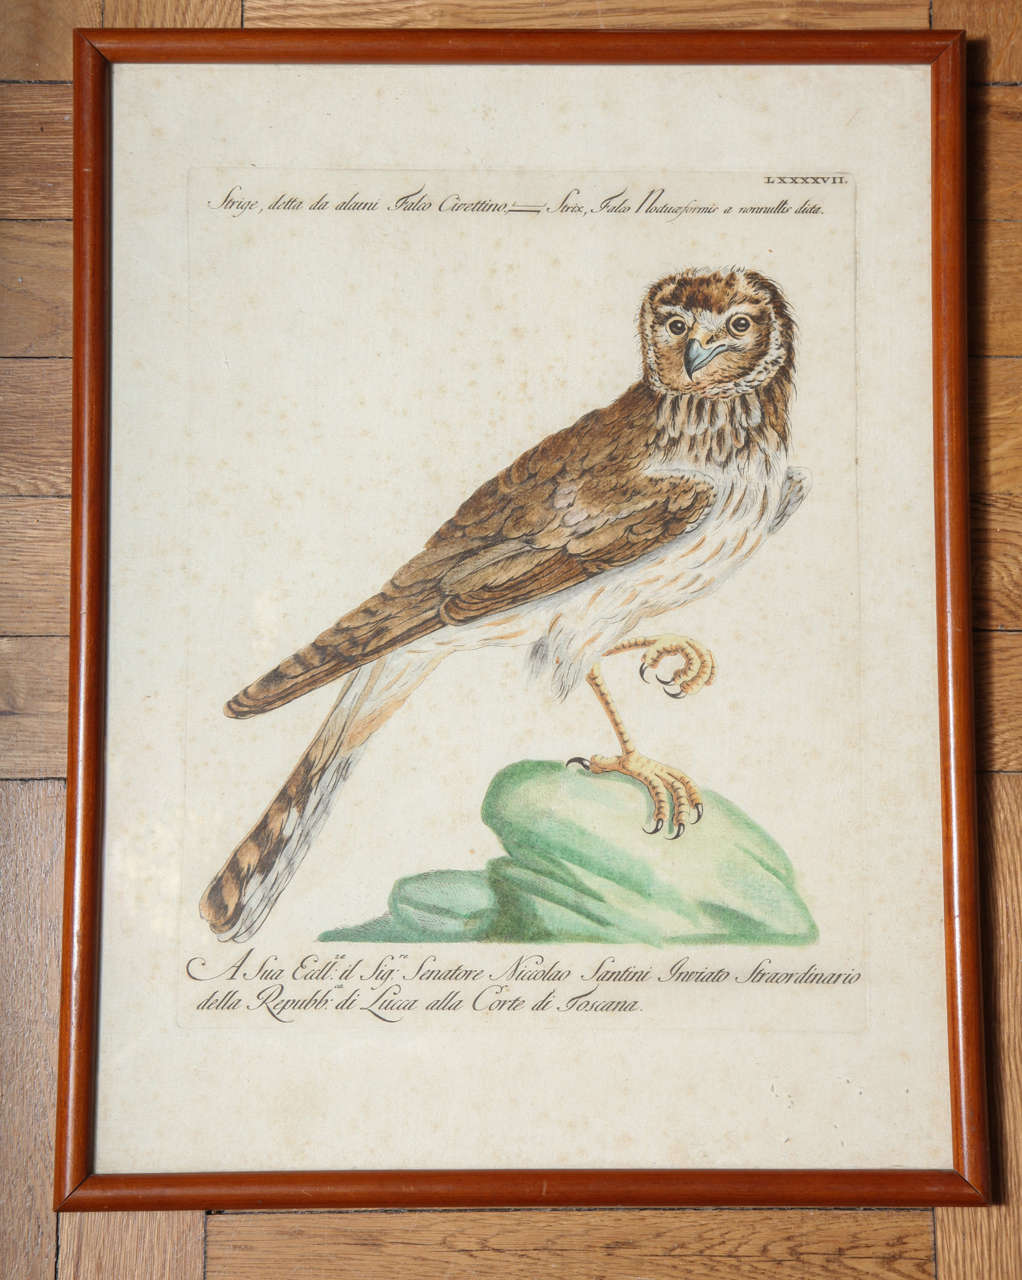 A 19th Century Owl Etching by G. Hullmandel, after J. Gould. France